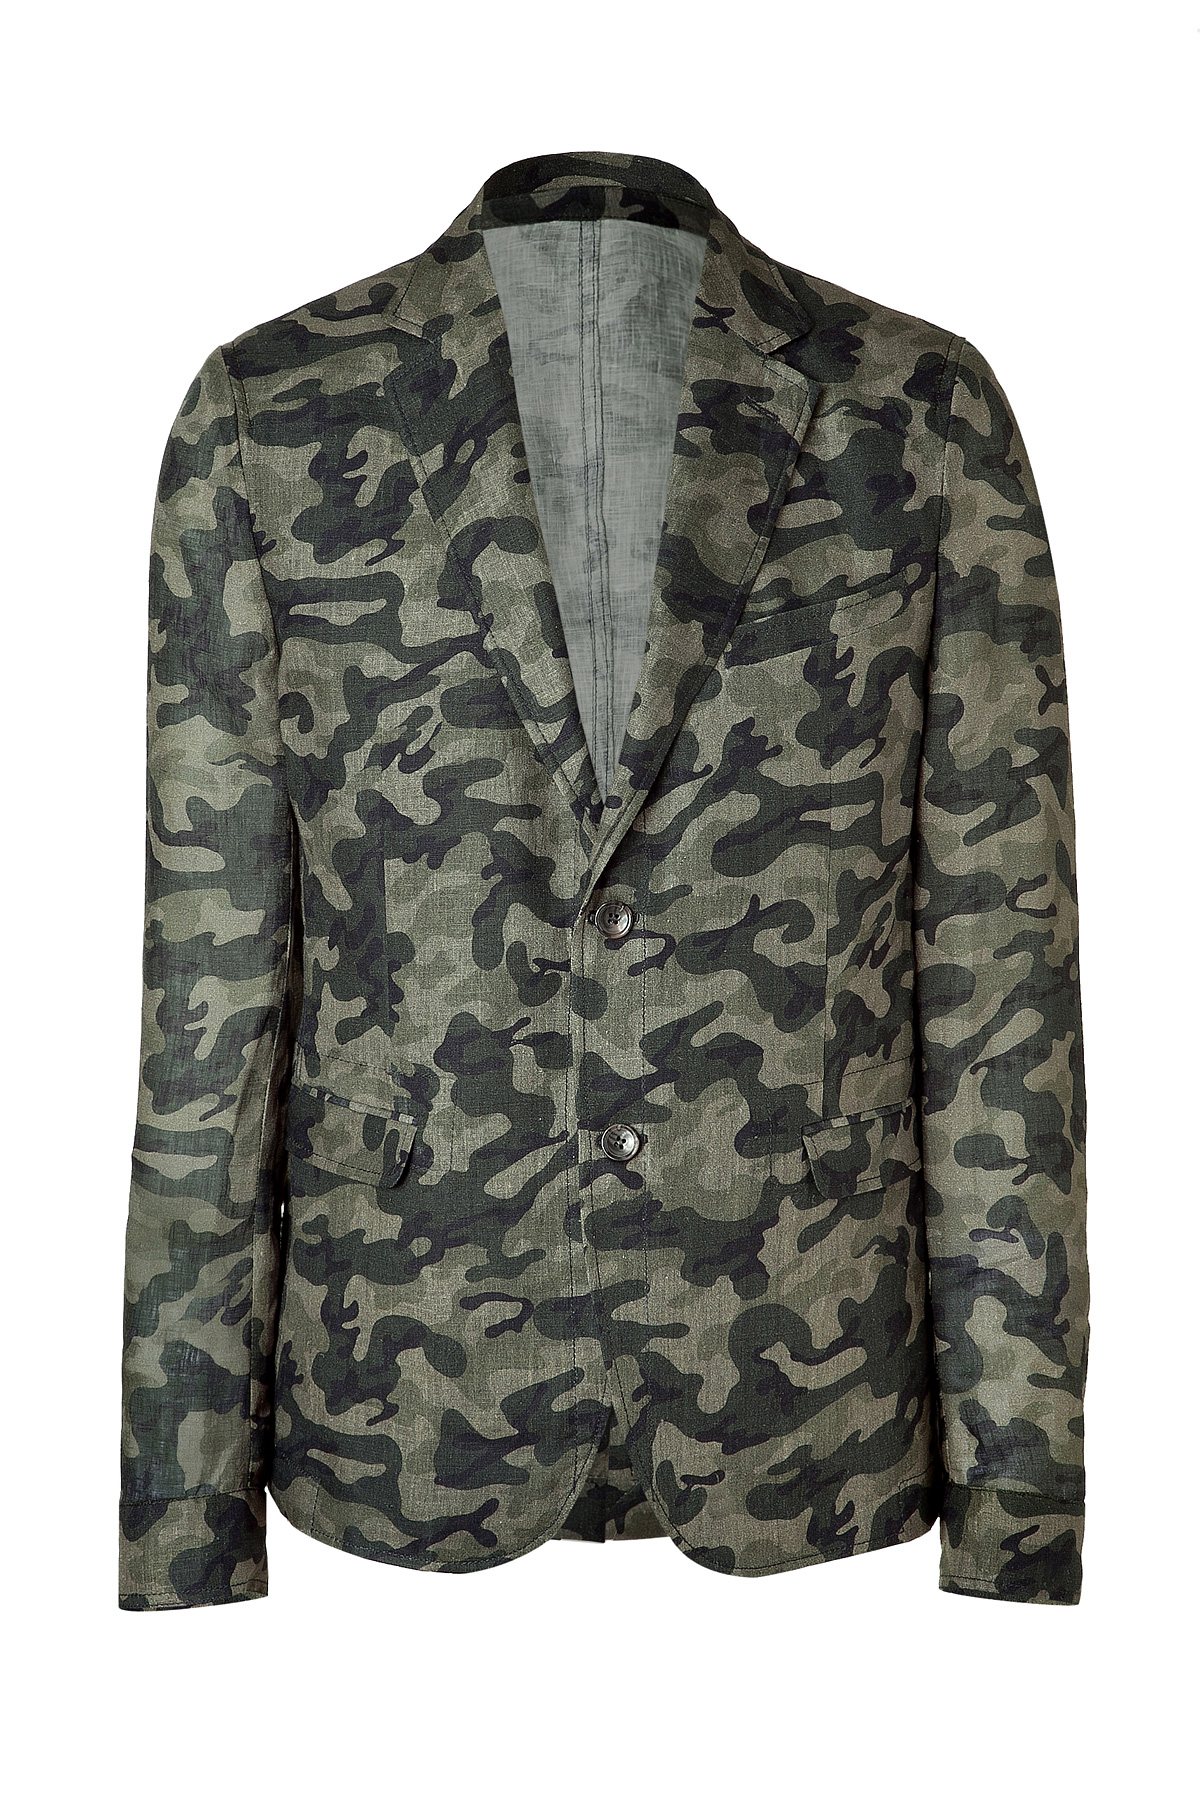 D&g Military Camouflage Linen Blazer in Green for Men (camo) | Lyst